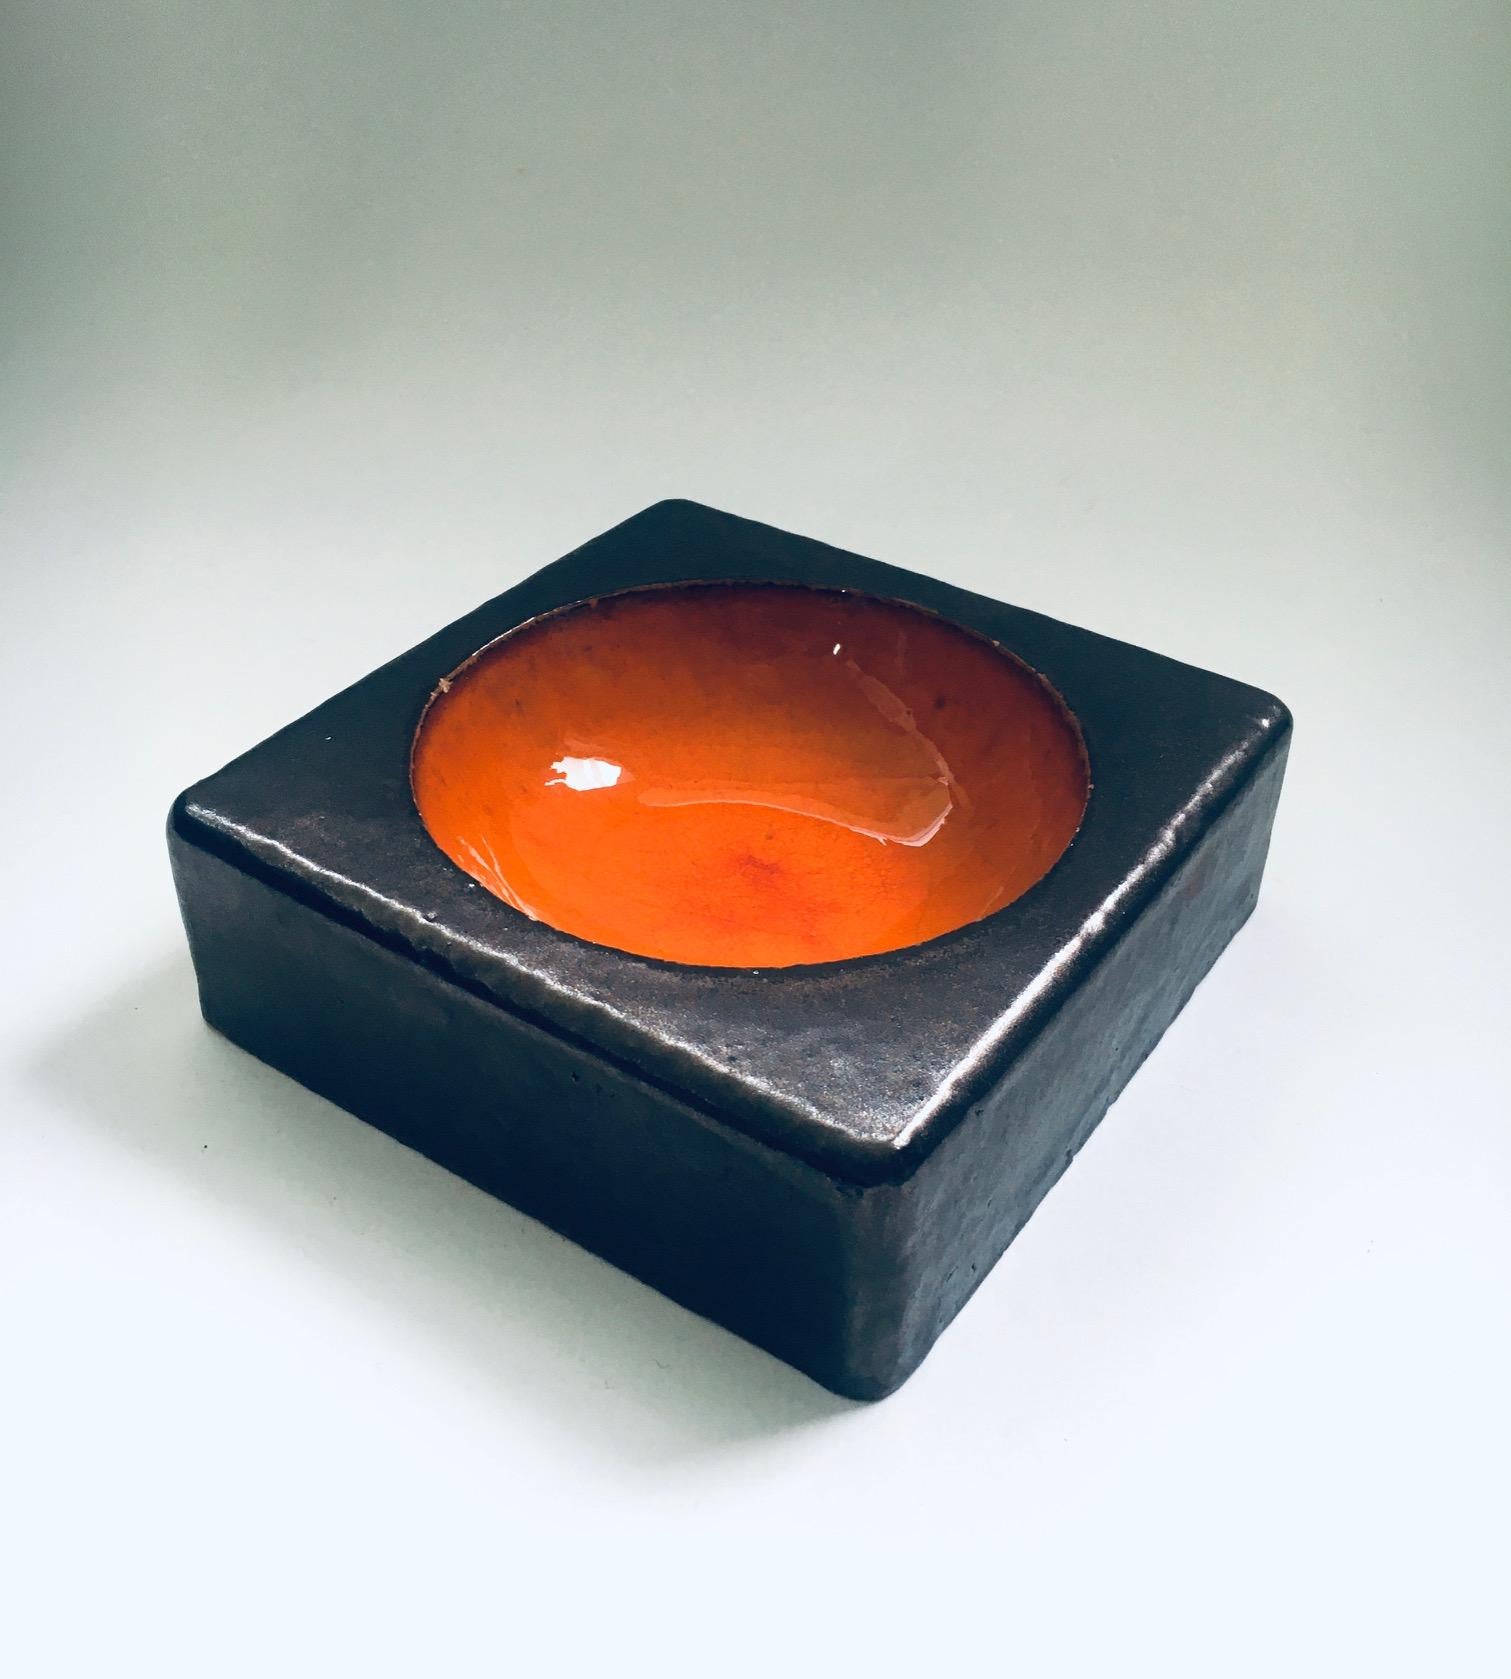 Vintage Midcentury Modern Art Pottery Studio Ceramic Vide Poche Bowl by Jeurissen. Made in Belgium, 1972. Signed and dated on the bottom by the artist. Hand made in the manner of the Perignem Studios by Rogier Vandeweghe. Comes in very good